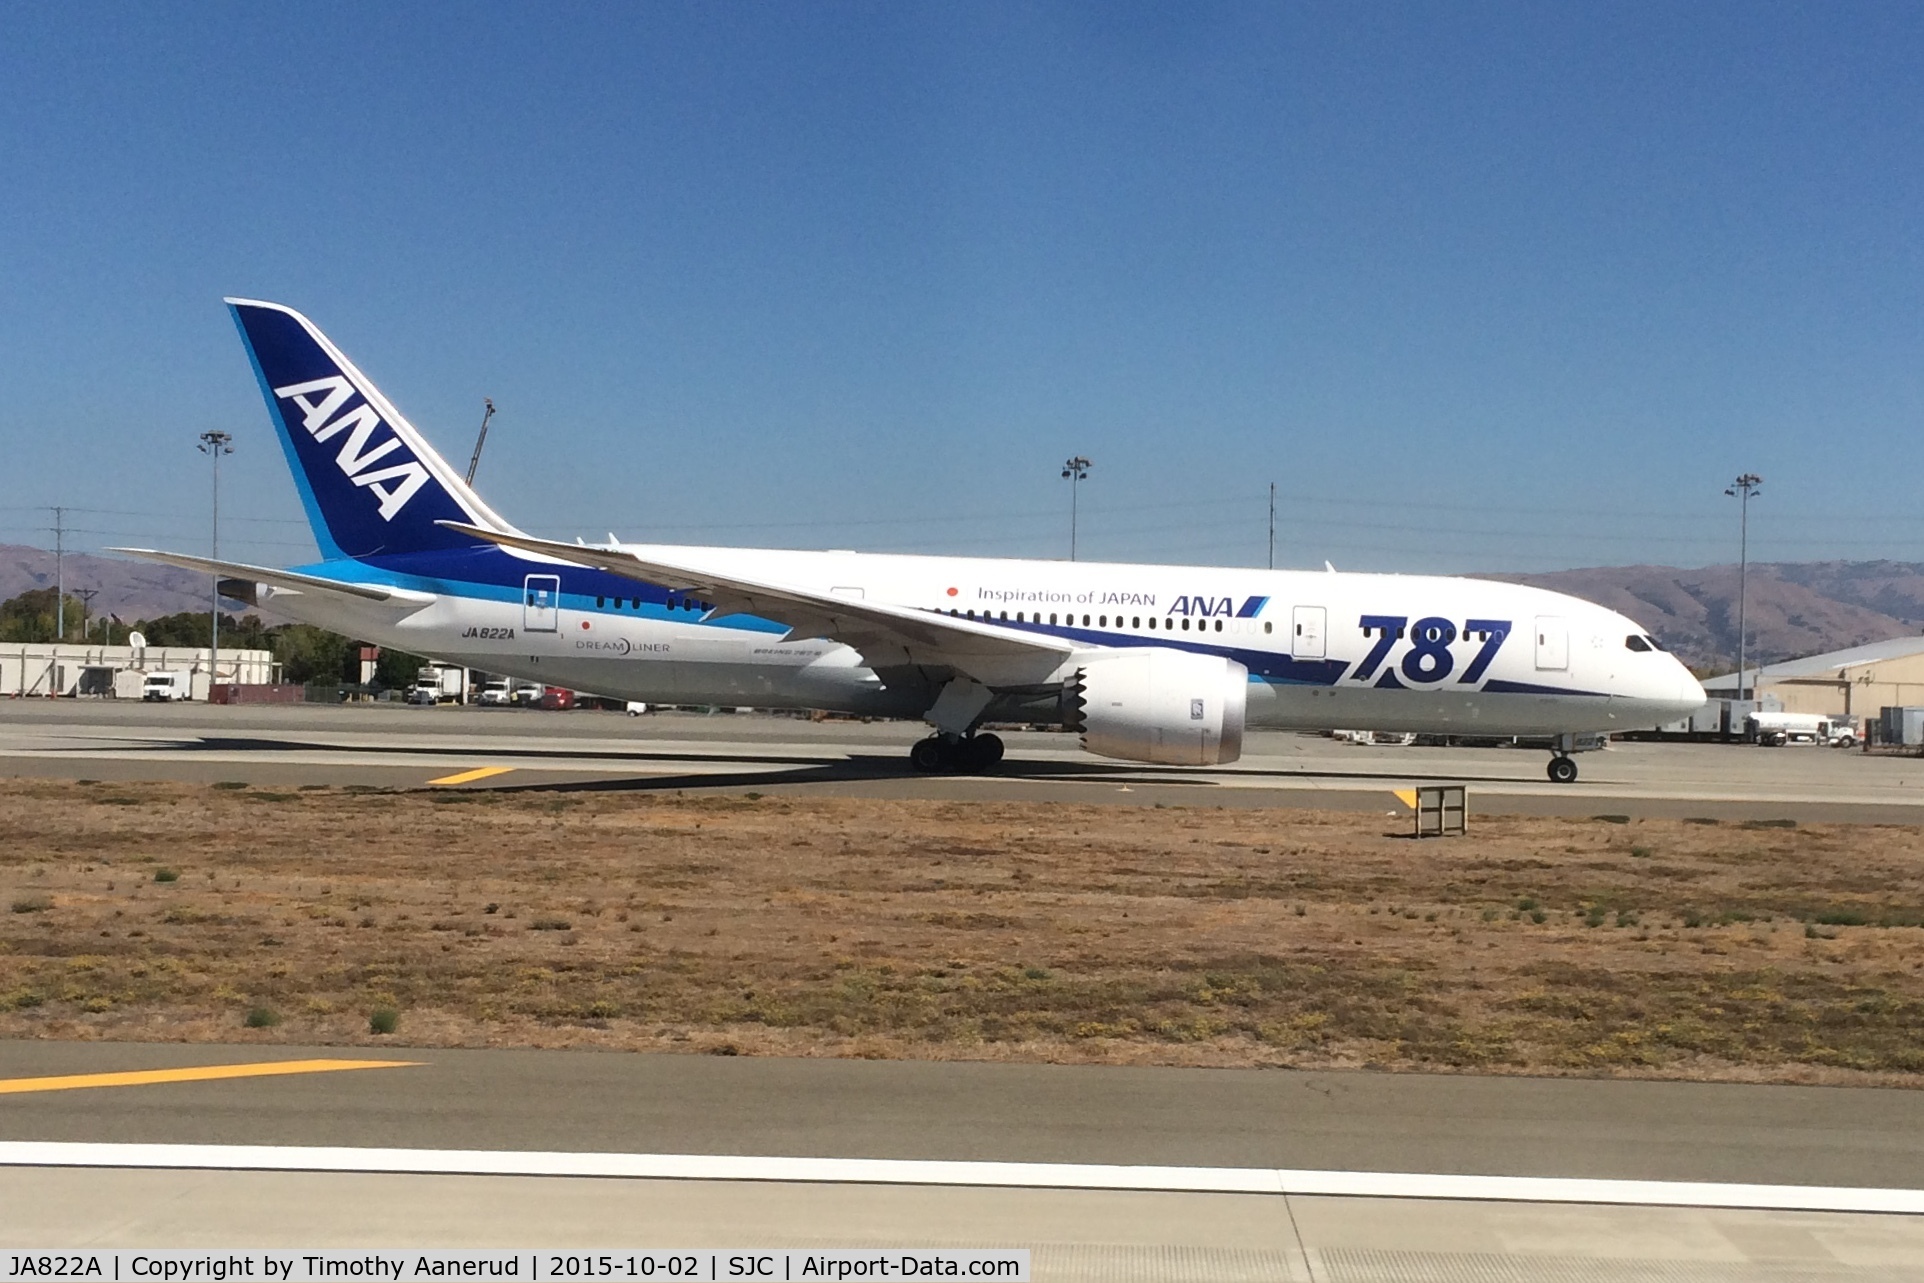 JA822A, 2013 Boeing 787-8 Dreamliner C/N 34512, Taxing to the active runway